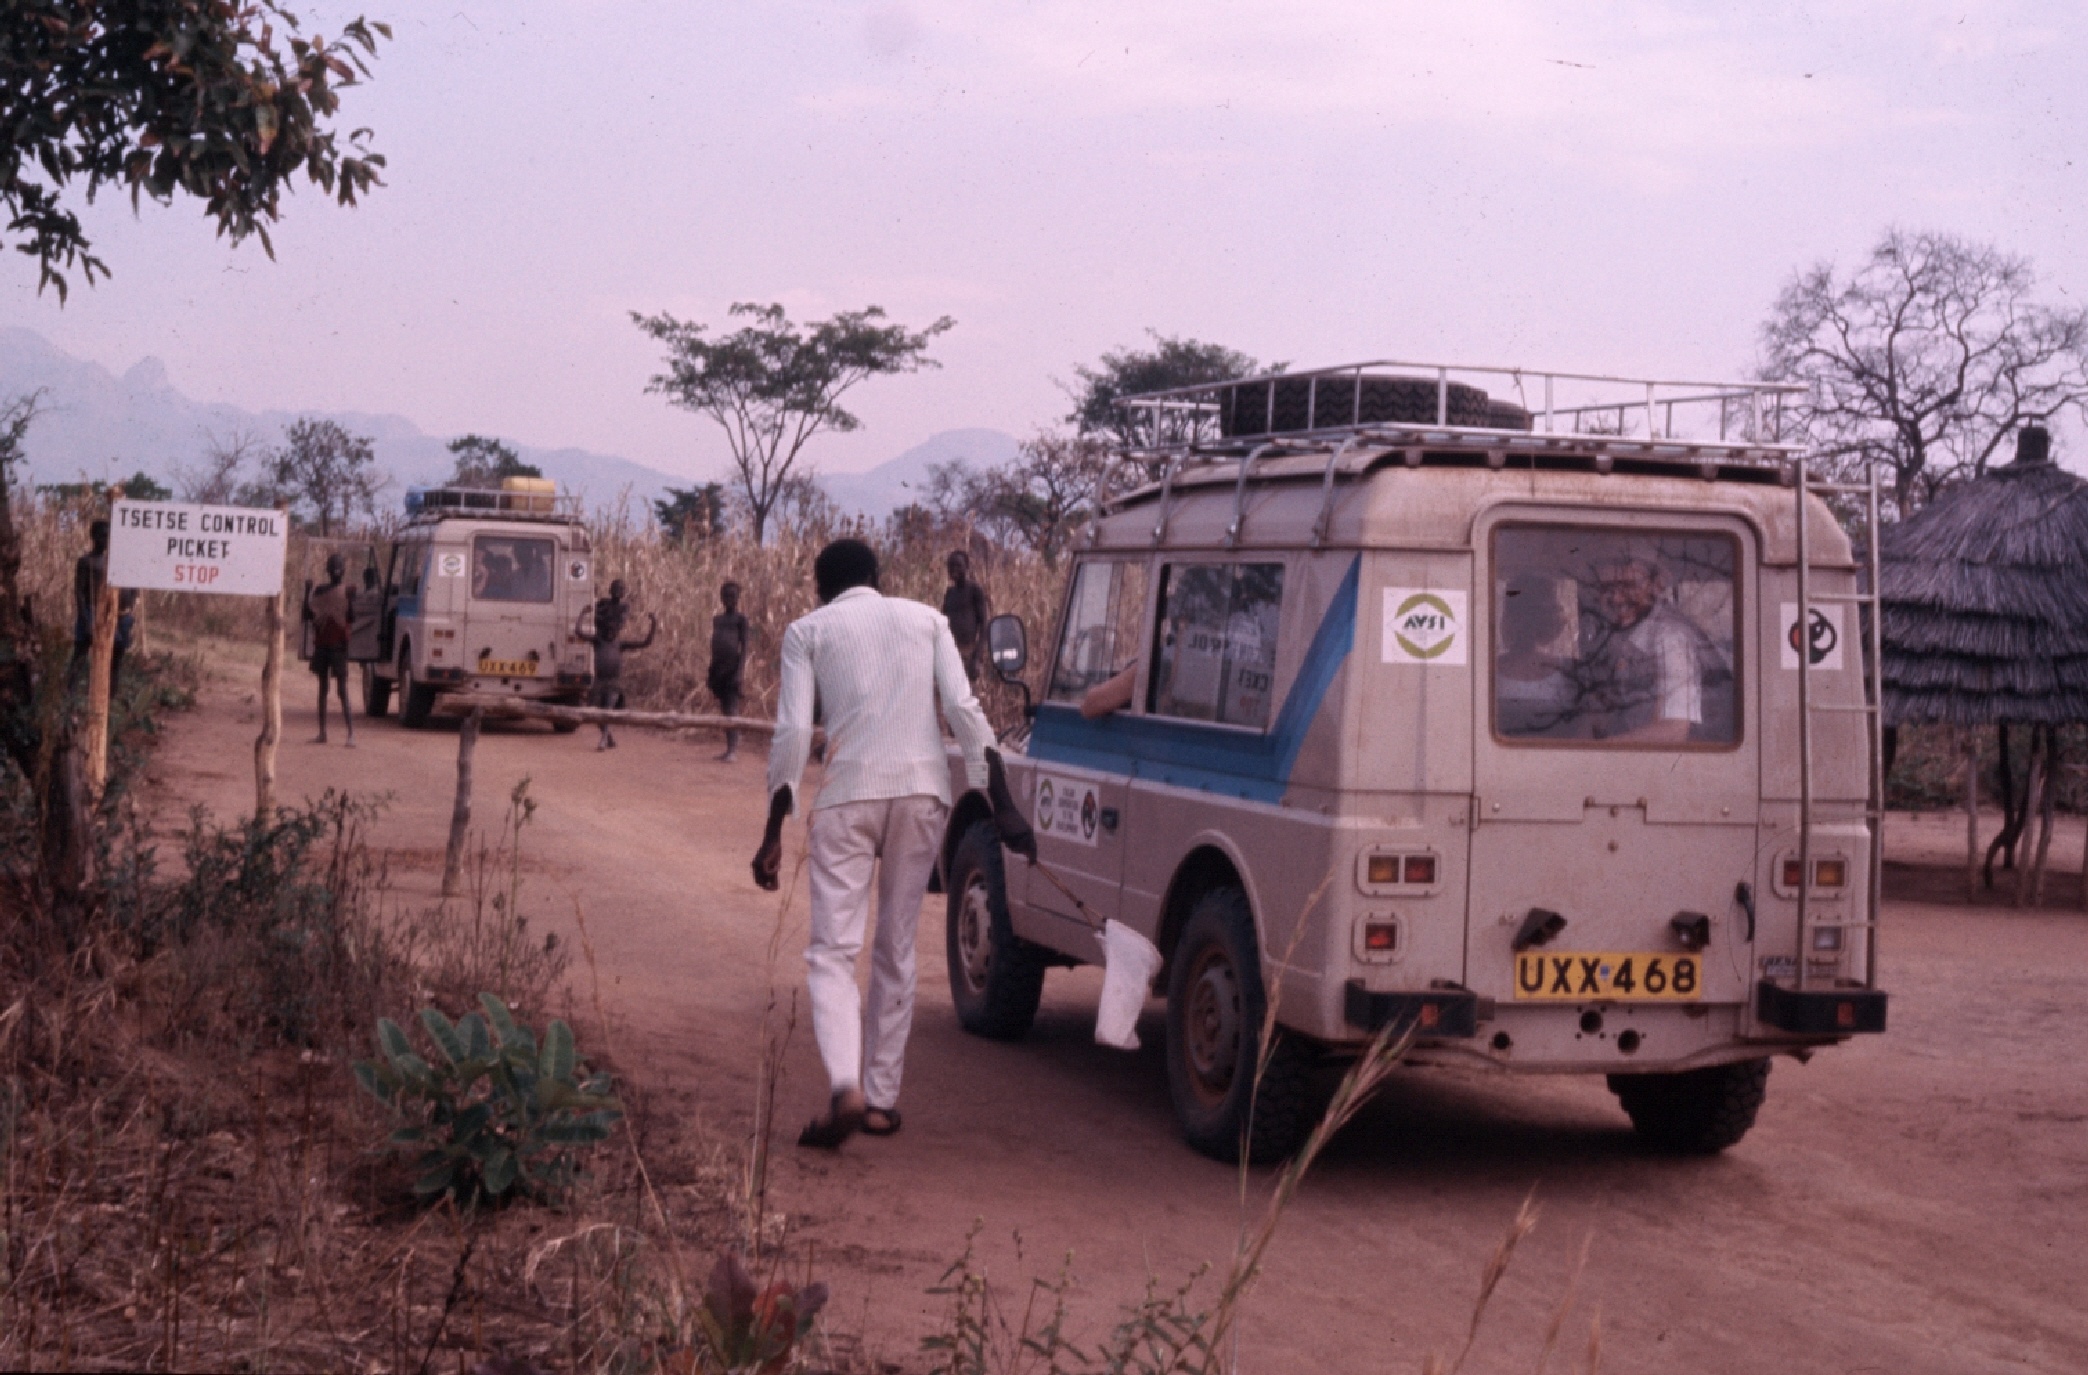 Filippo Ciantia - Two AVSI Campagnolas are stopped at a check-point for Tsetse control on the road towards Palabek Health Centre